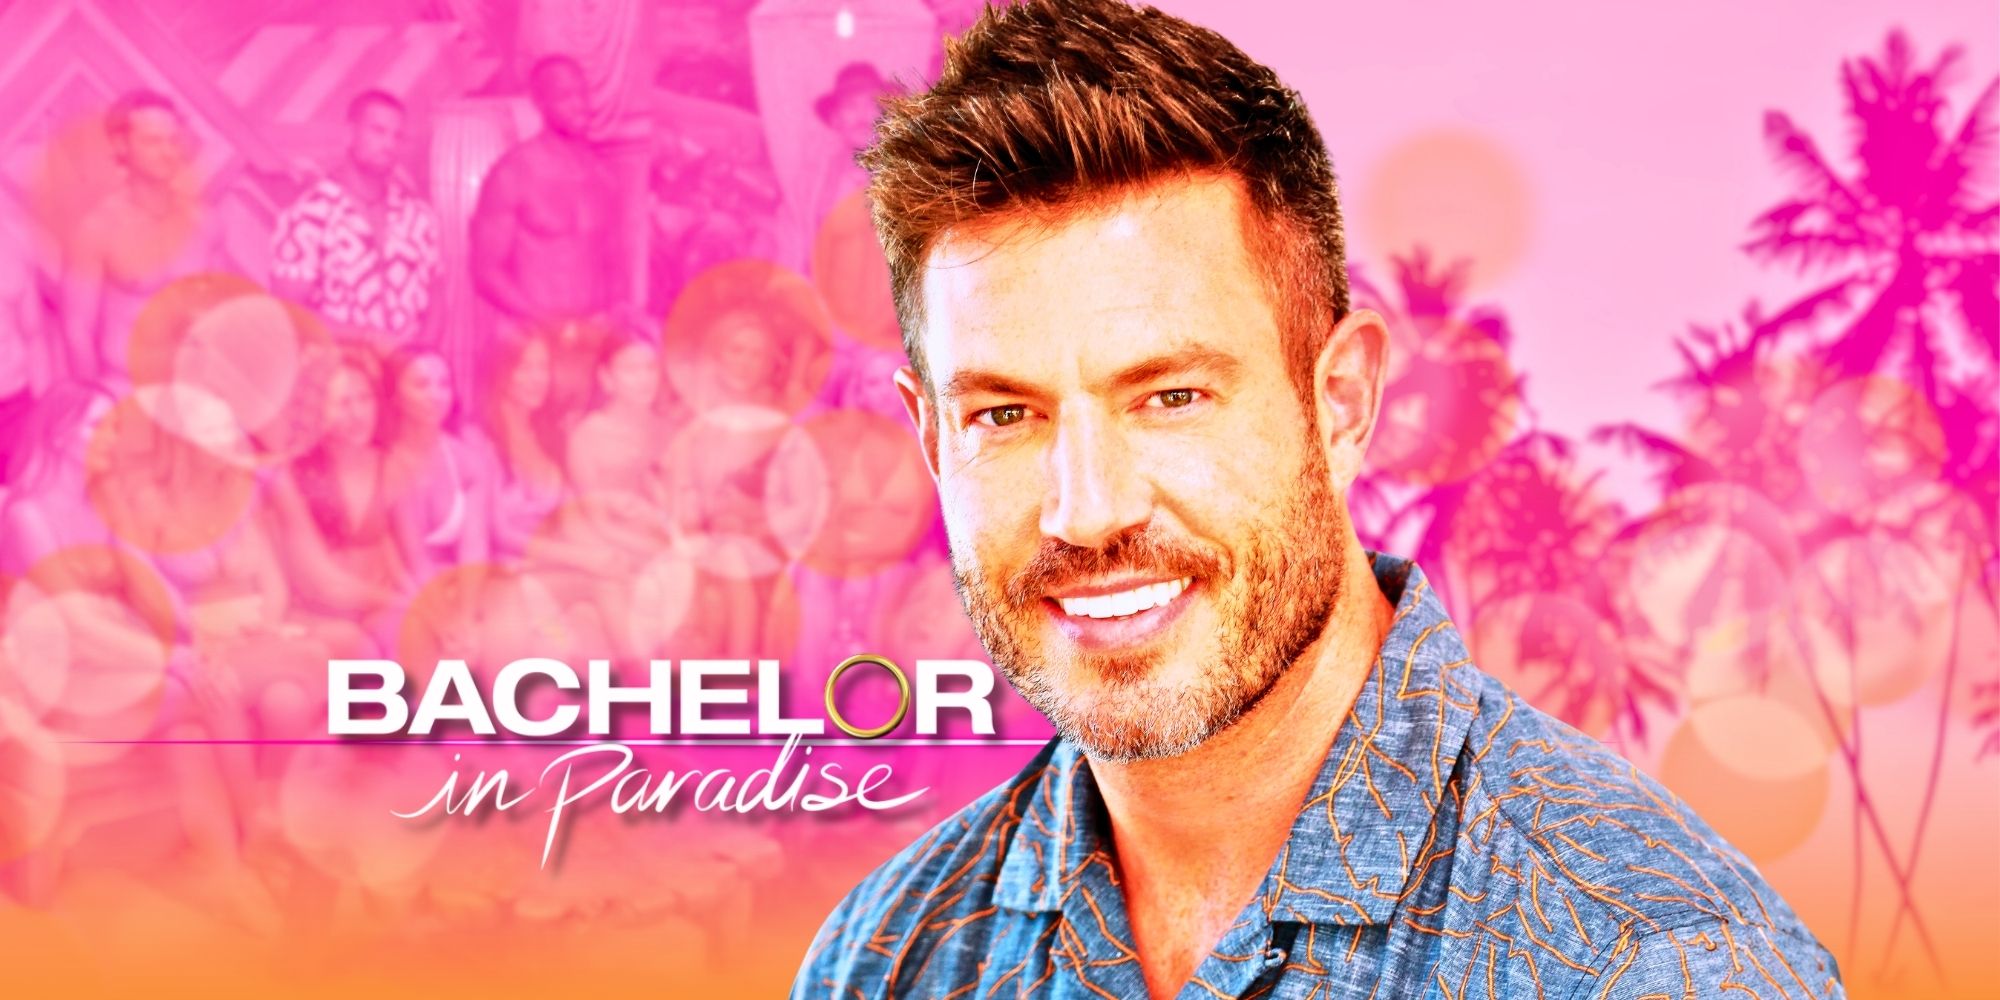 Bachelor In Paradise promo with Jesse Palmer and season 9 cast in the background